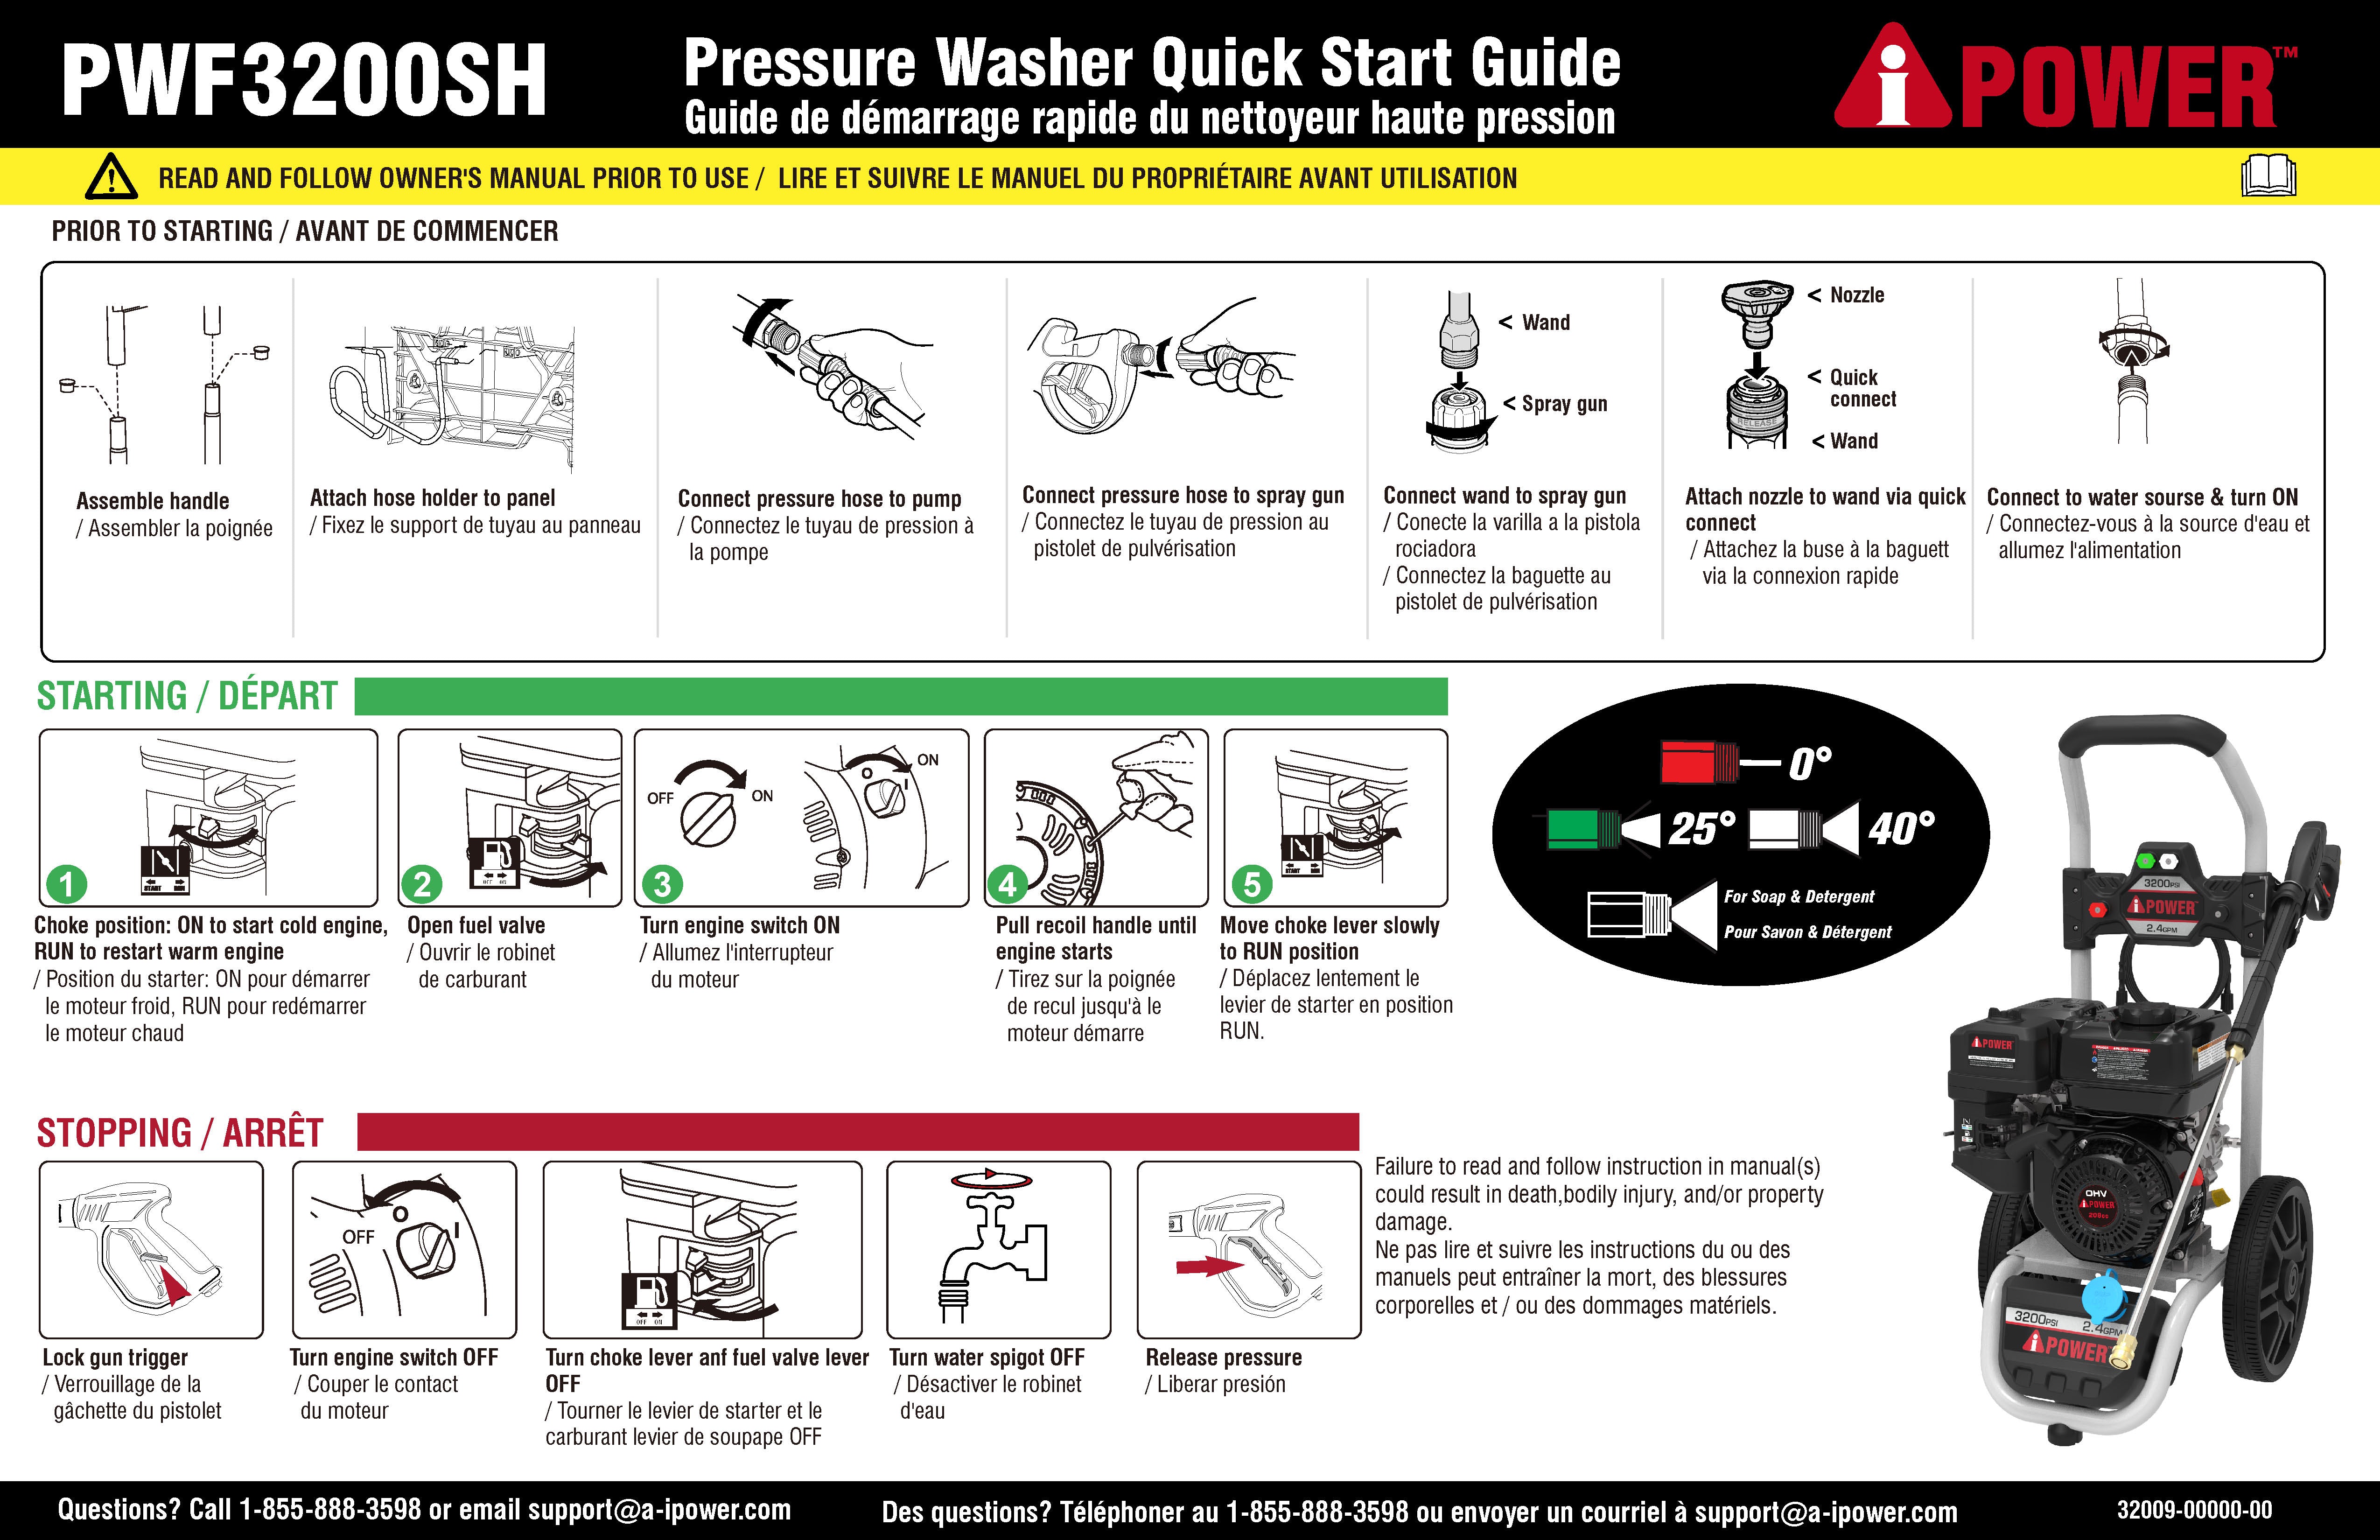 PWF3200SH - A-iPower Pressure Washer - Quick Start Guide.jpg__PID:de1e2a31-64b6-4084-be49-58a20bd017d8